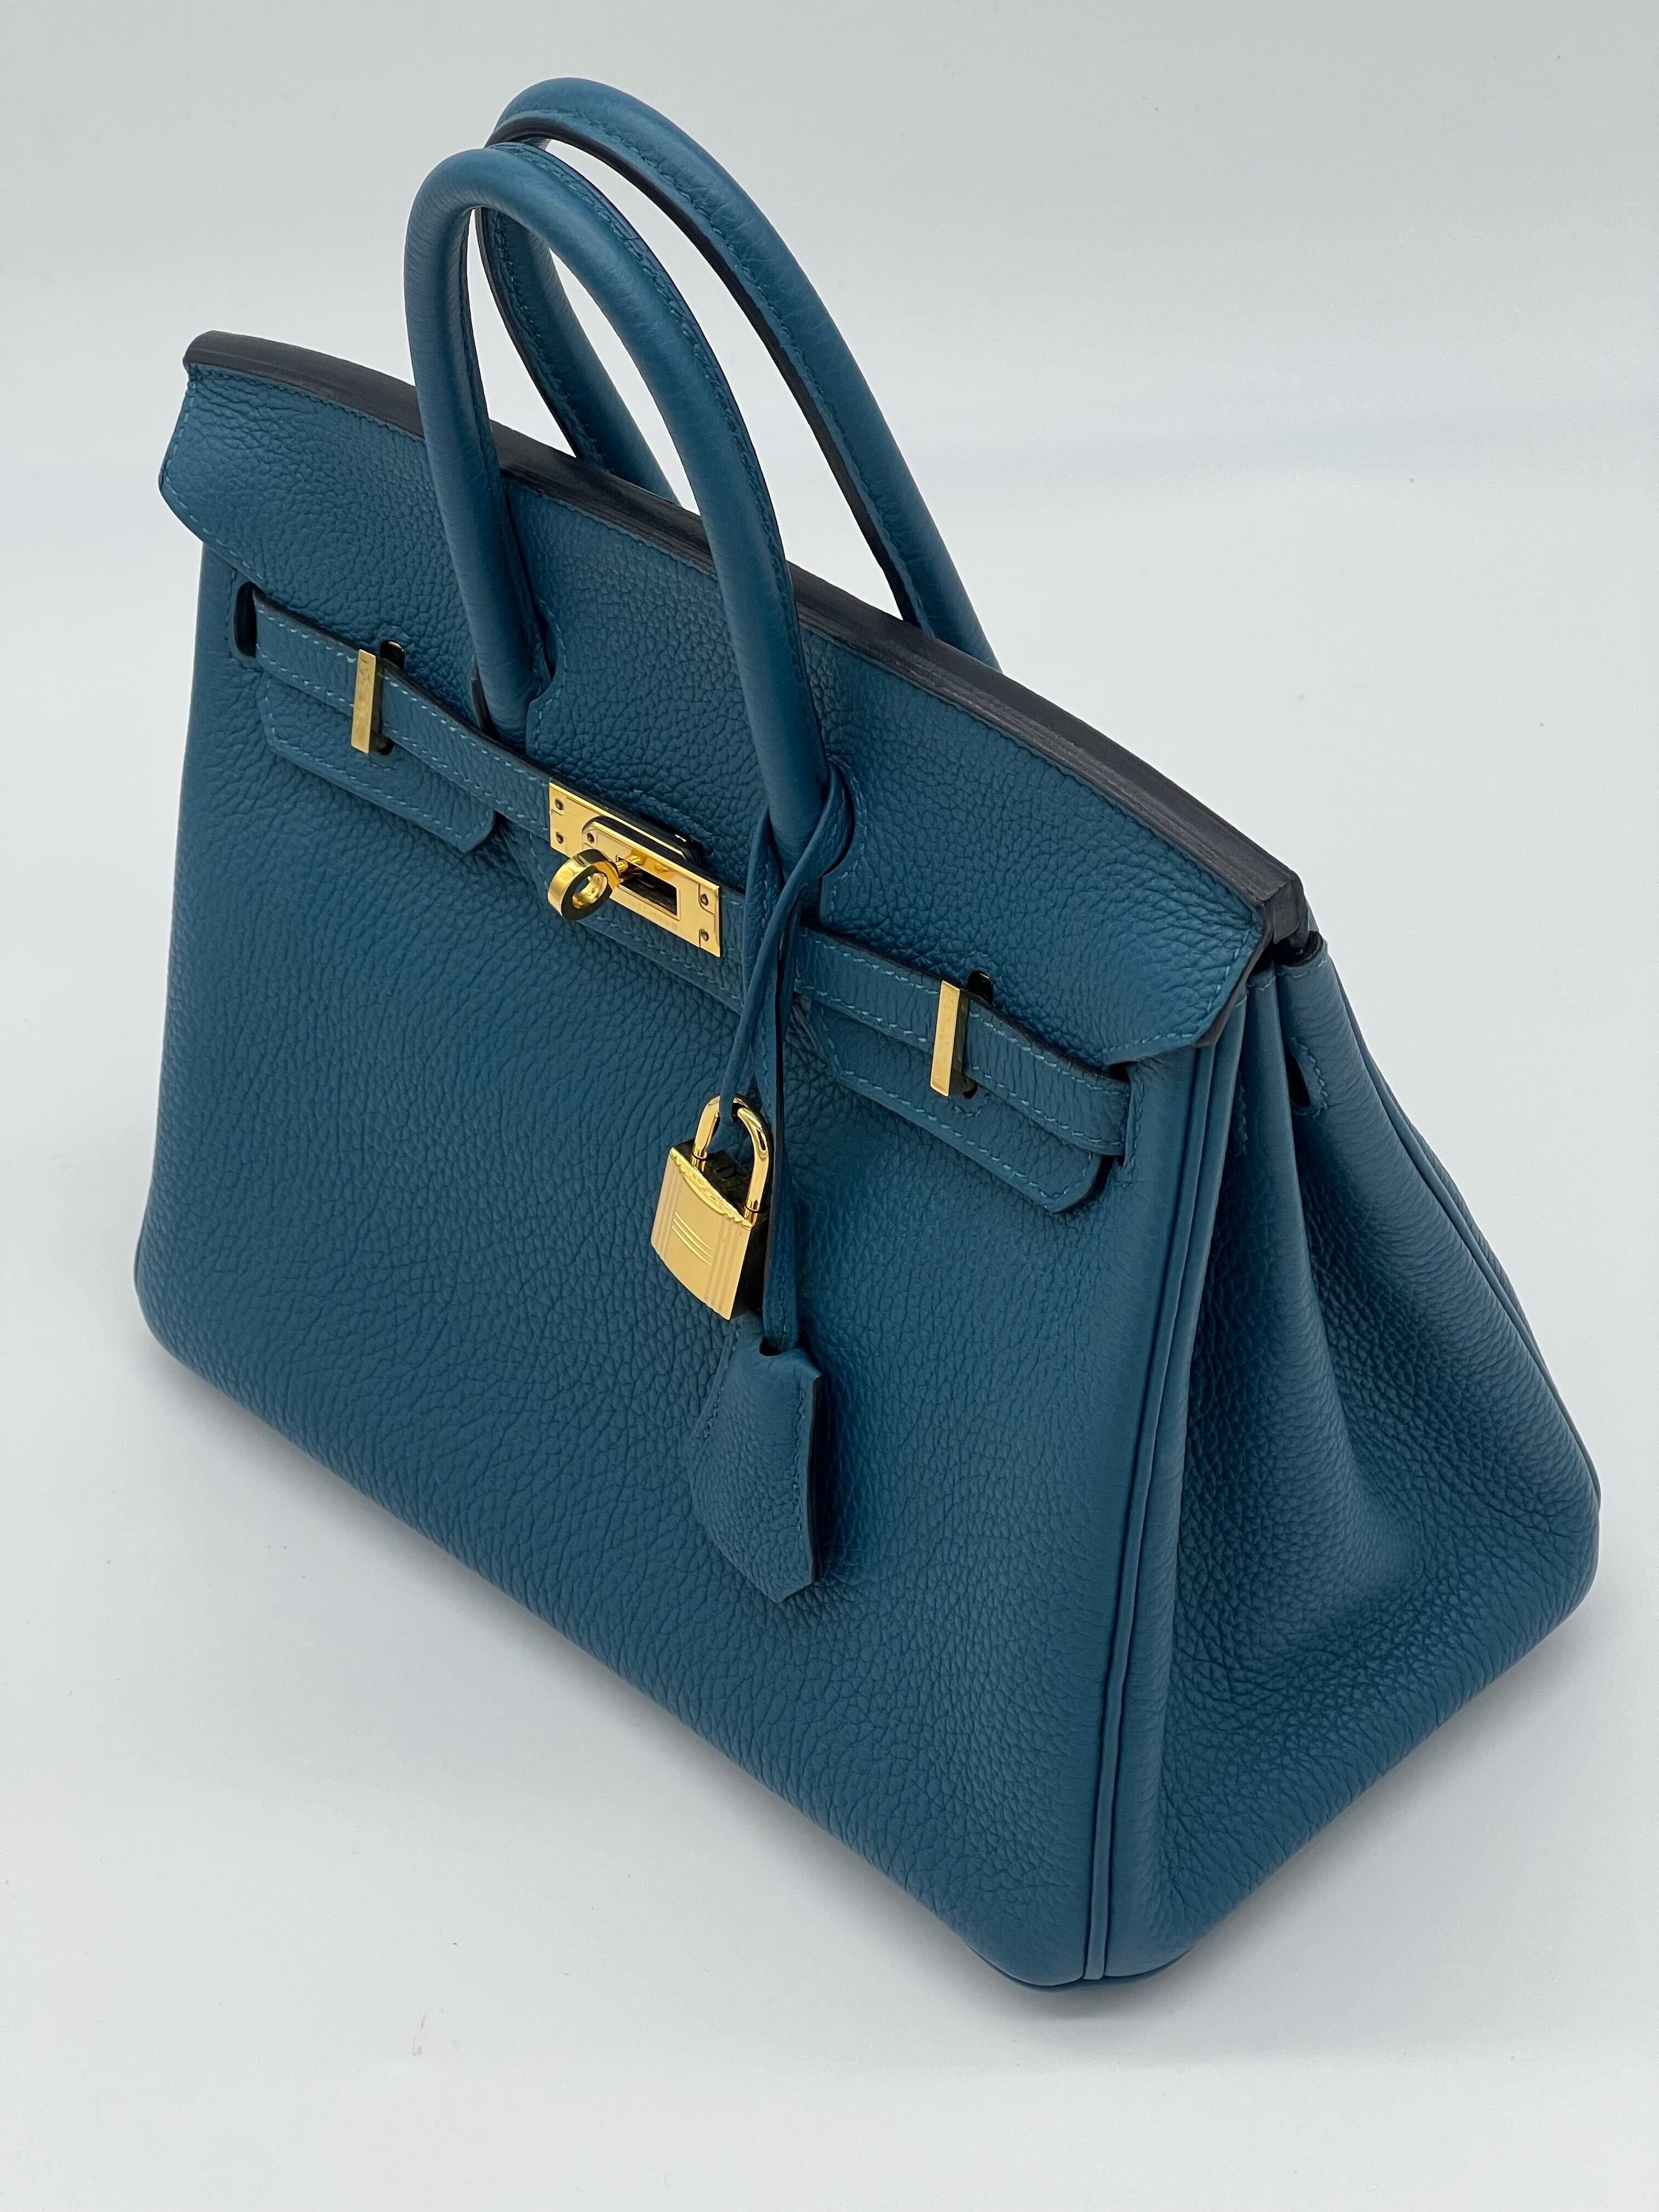 Hermes Birkin 25 Bleu Thalassa Togo Leather Gold Hardware

Condition: Pre-owned (like new)
Measurements:
Material: Togo Leather
Hardware: Gold plated

*Comes with full original packaging.
*Full plastic on hardware.